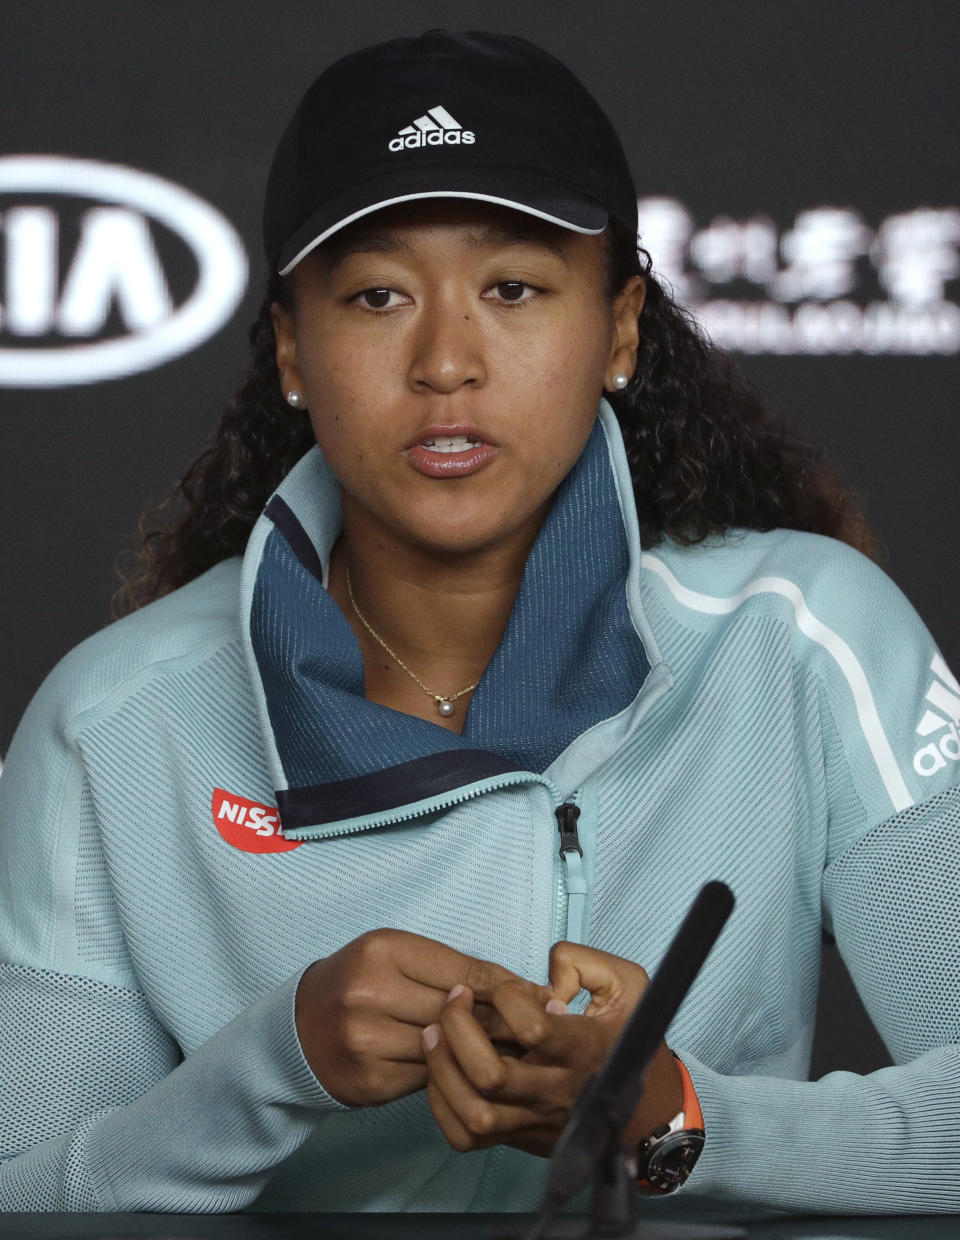 Japan's Naomi Osaka answers questions at a press conference following her win over Karolina Pliskova of the Czech Republic in their semifinal at the Australian Open tennis championships in Melbourne, Australia, Thursday, Jan. 24, 2019. (AP Photo/Mark Schiefelbein)